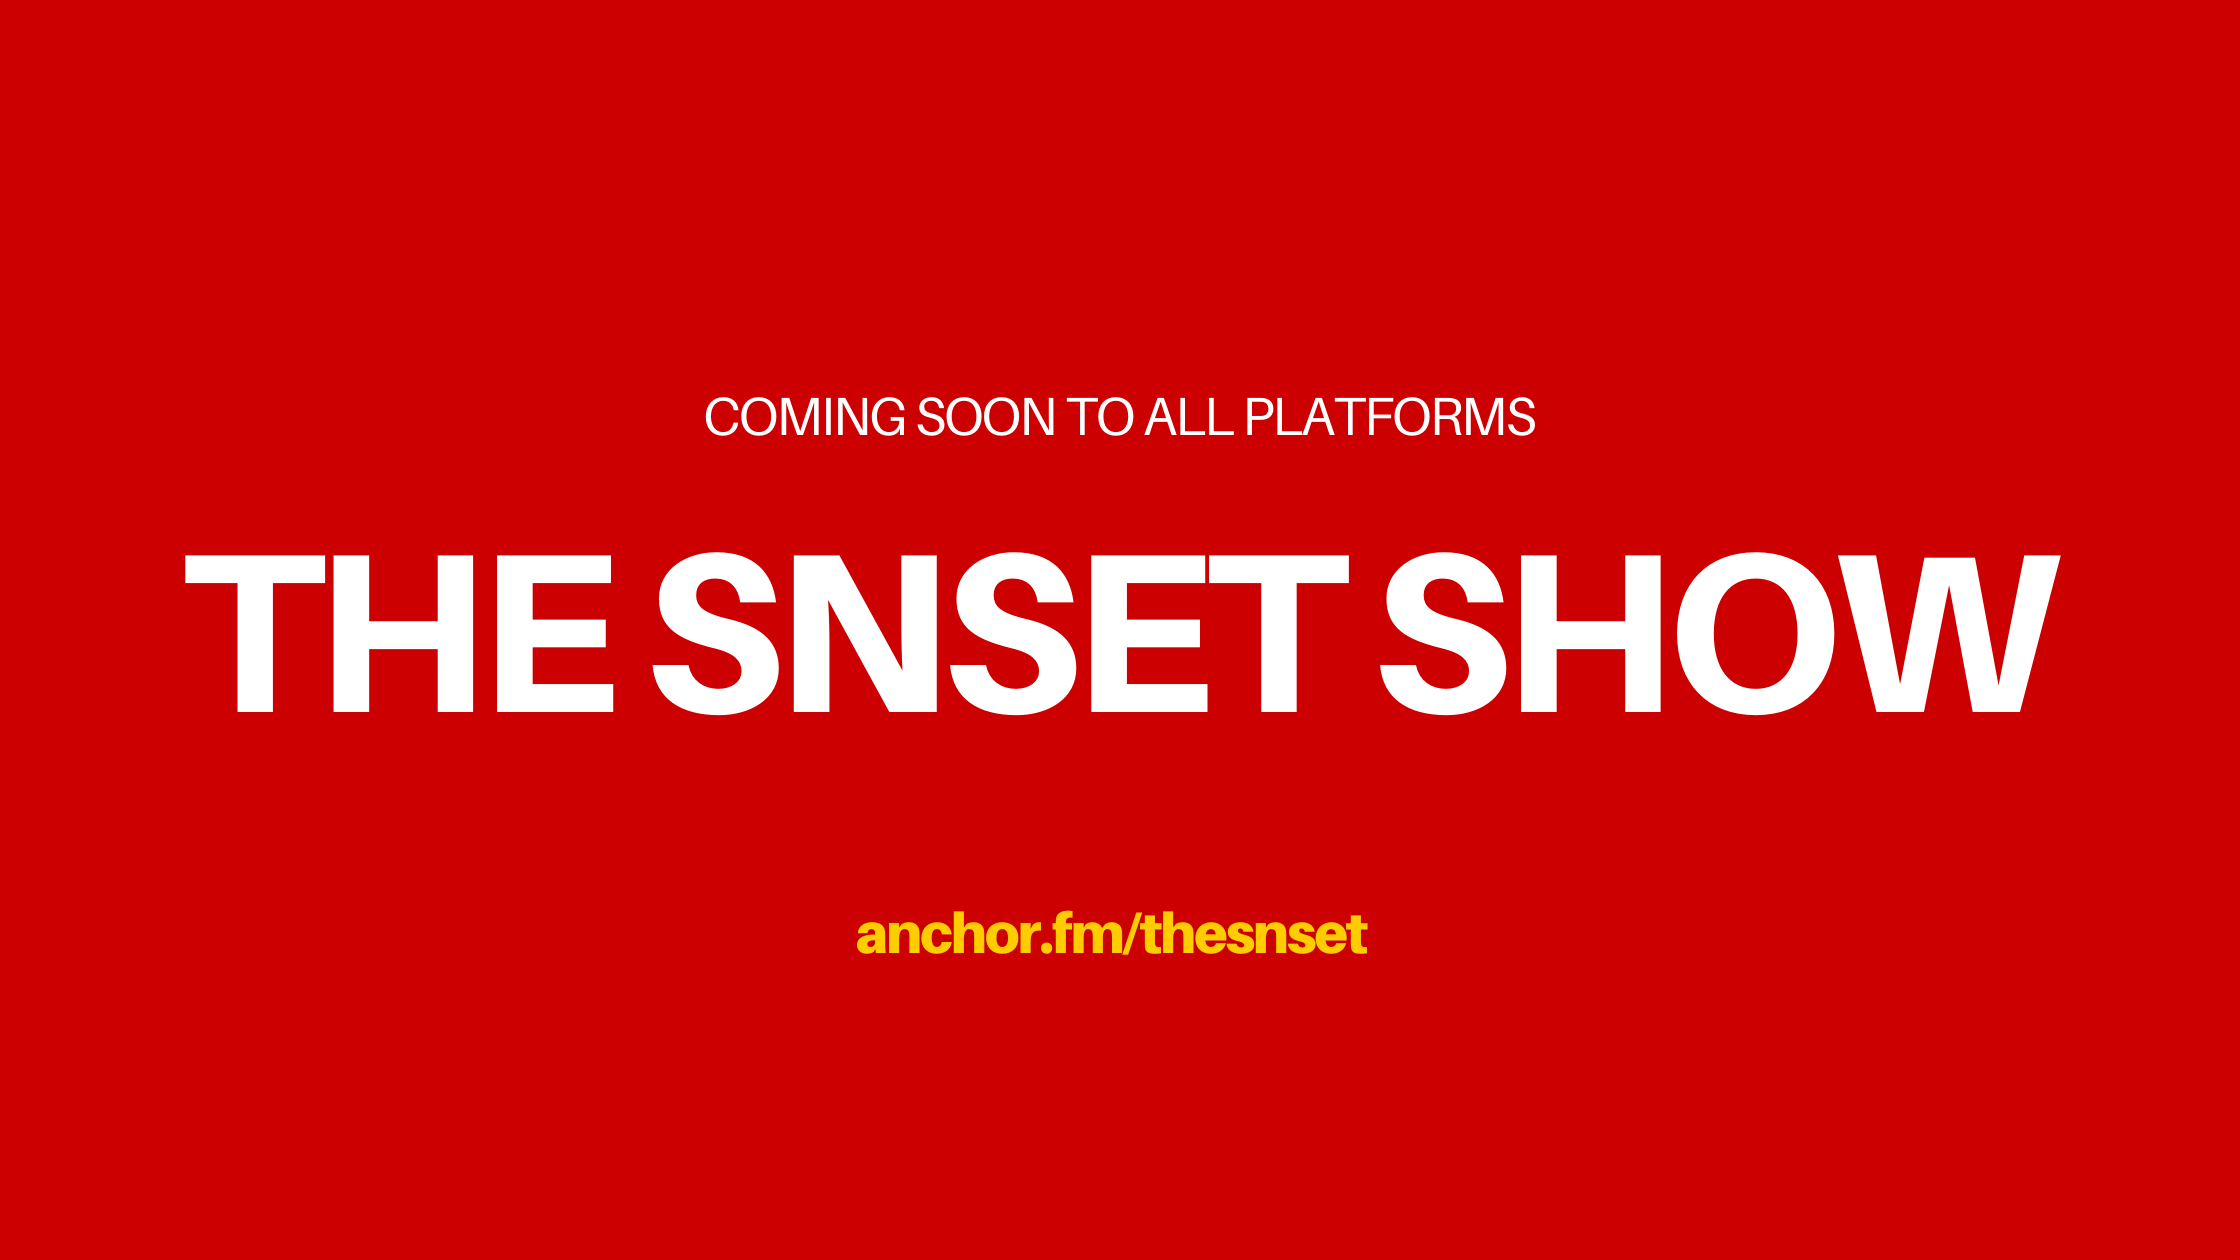 The Snset Show Coming Soon To All Platforms